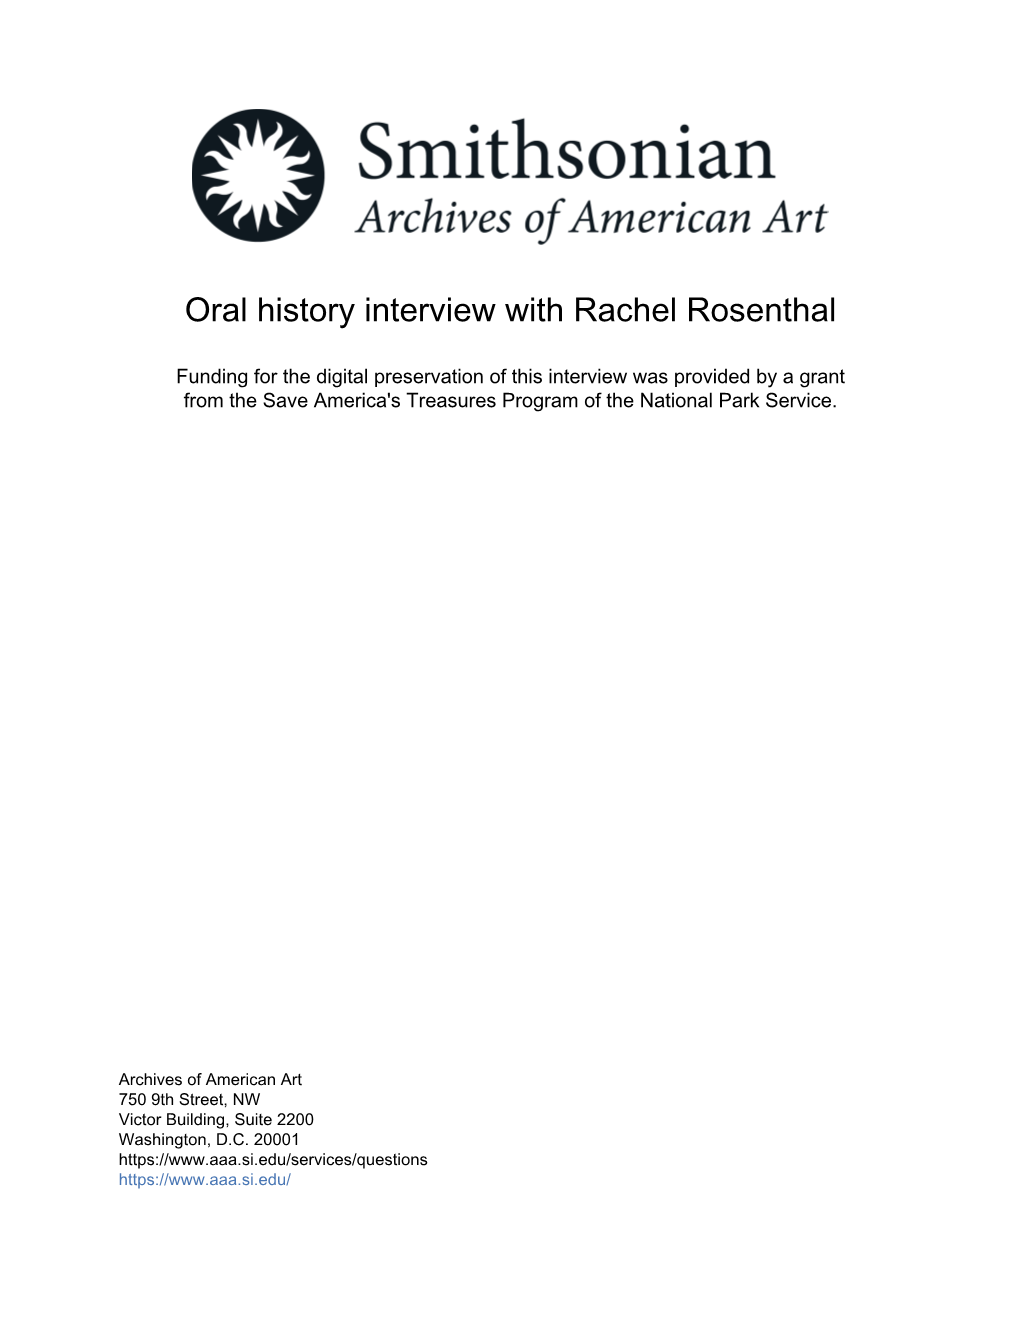 Oral History Interview with Rachel Rosenthal